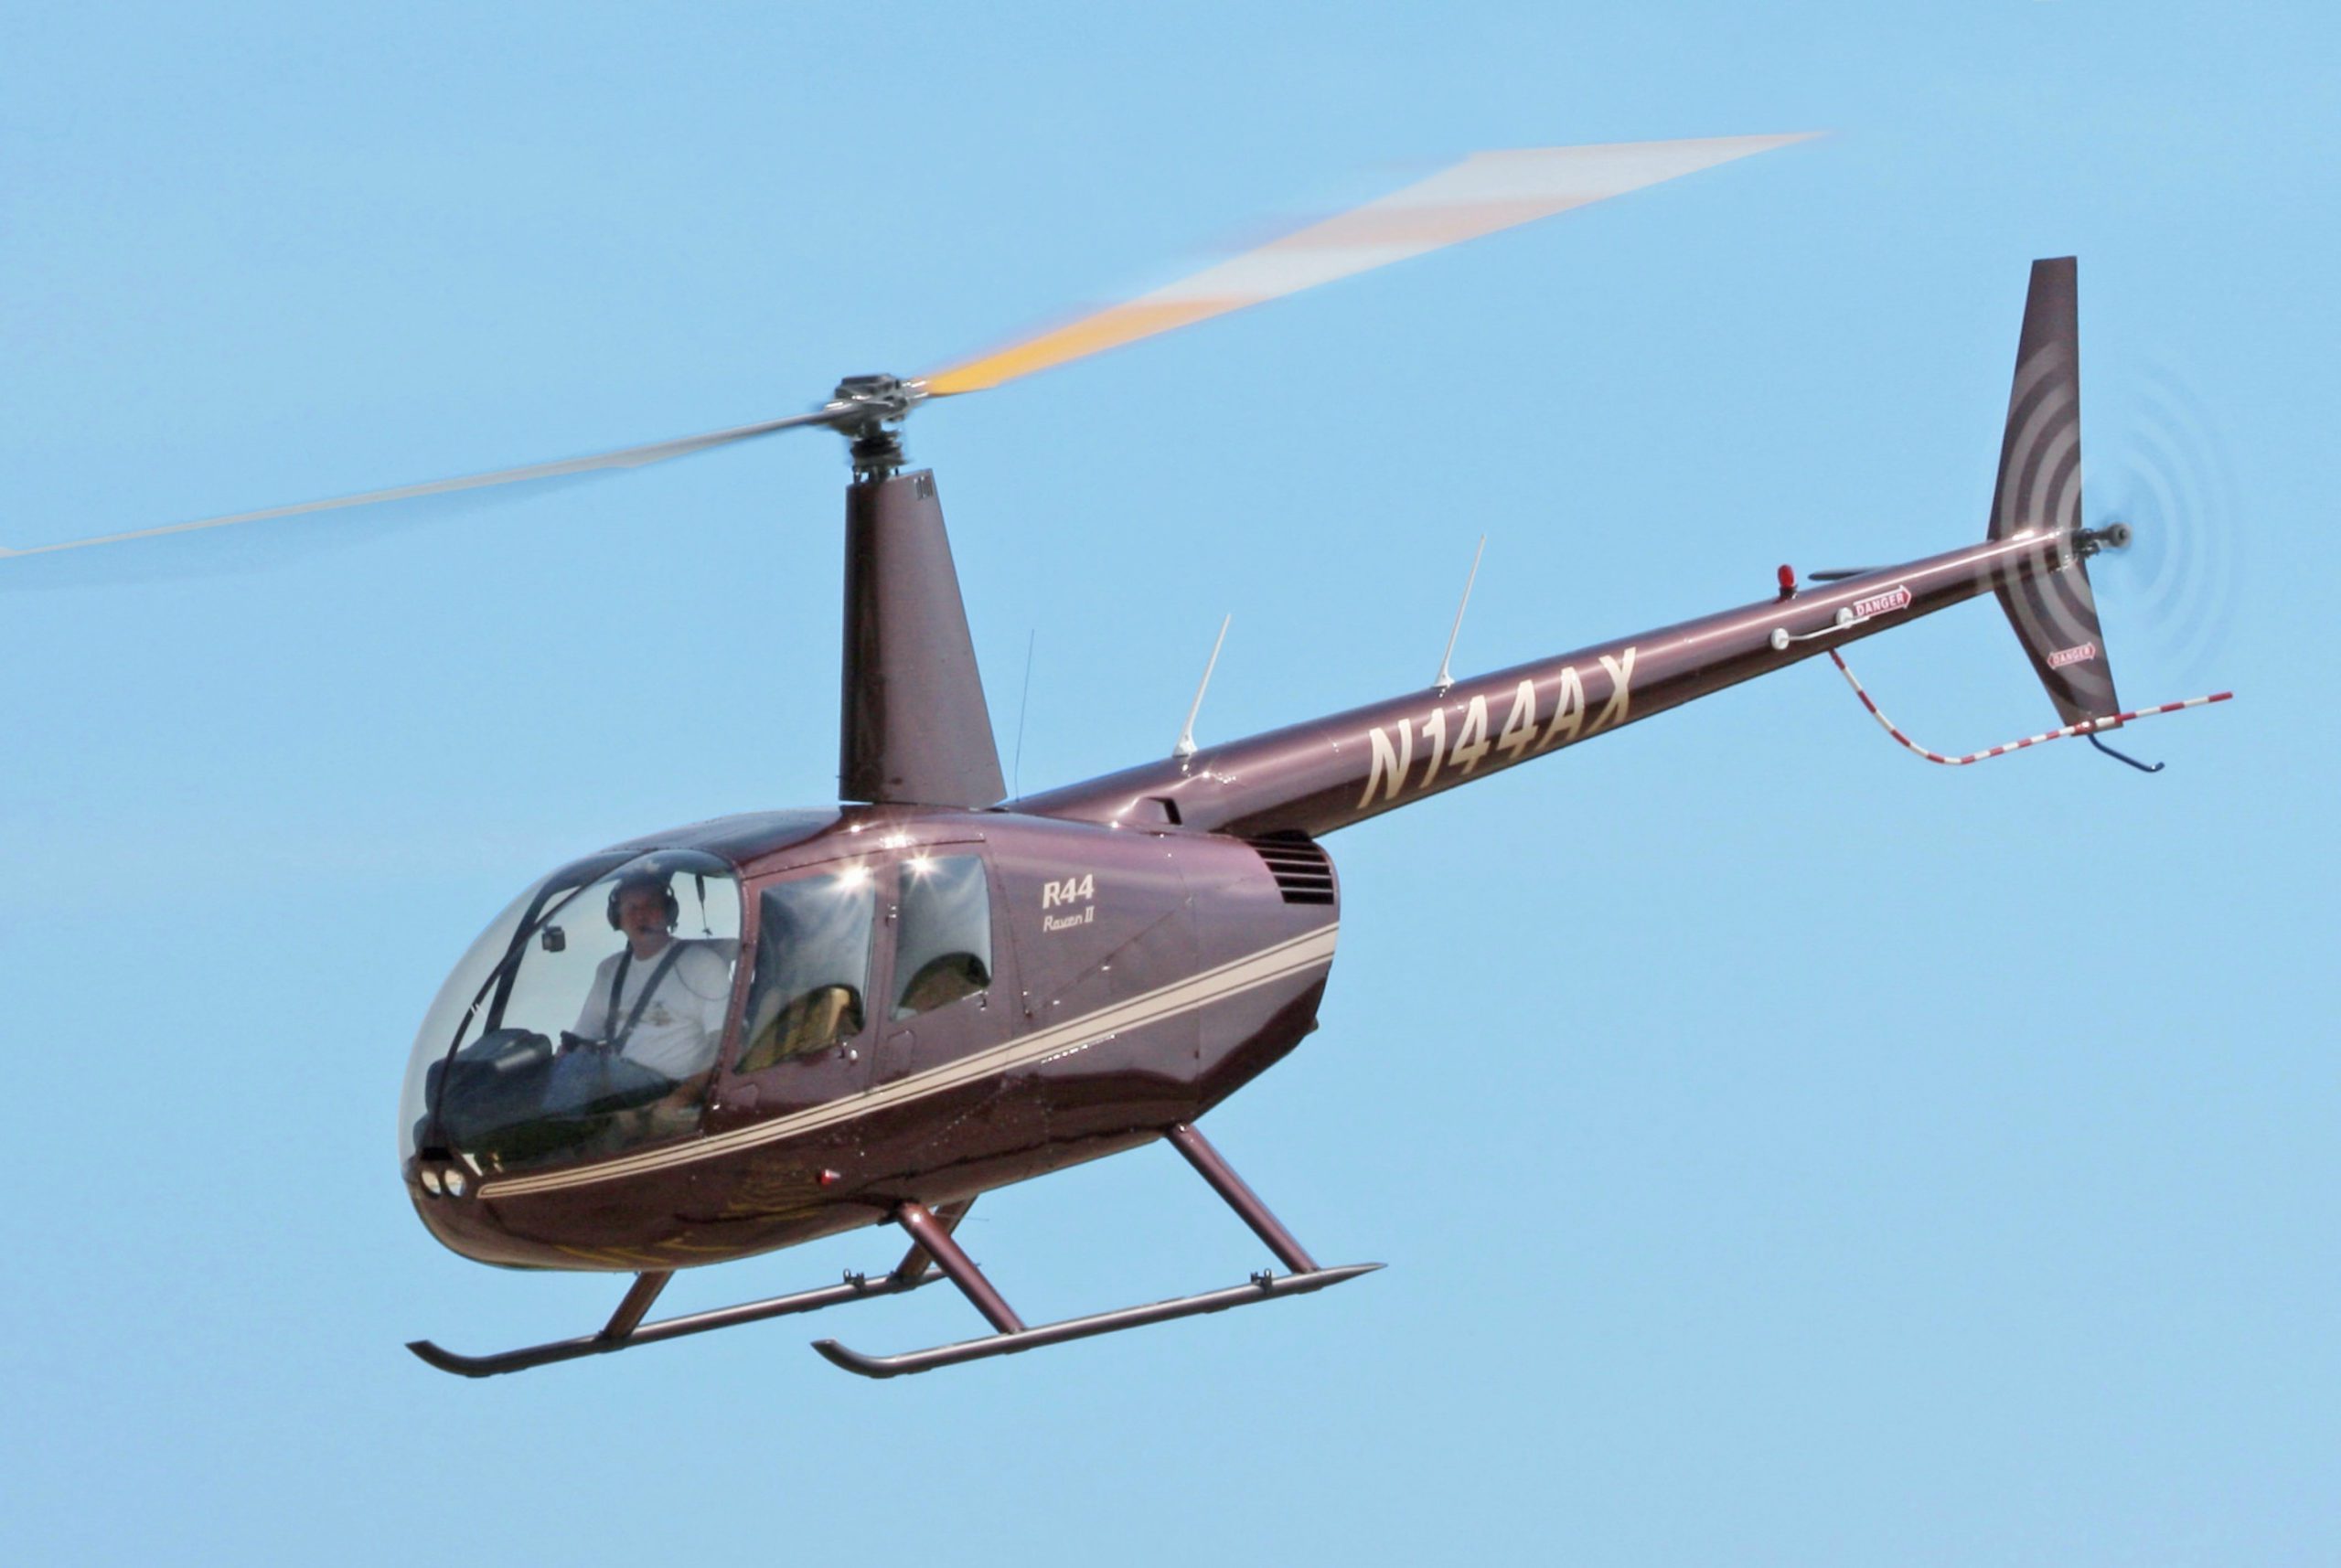 Image of a Robinson R-44 model helicopter by D. Miller / Wikimedia